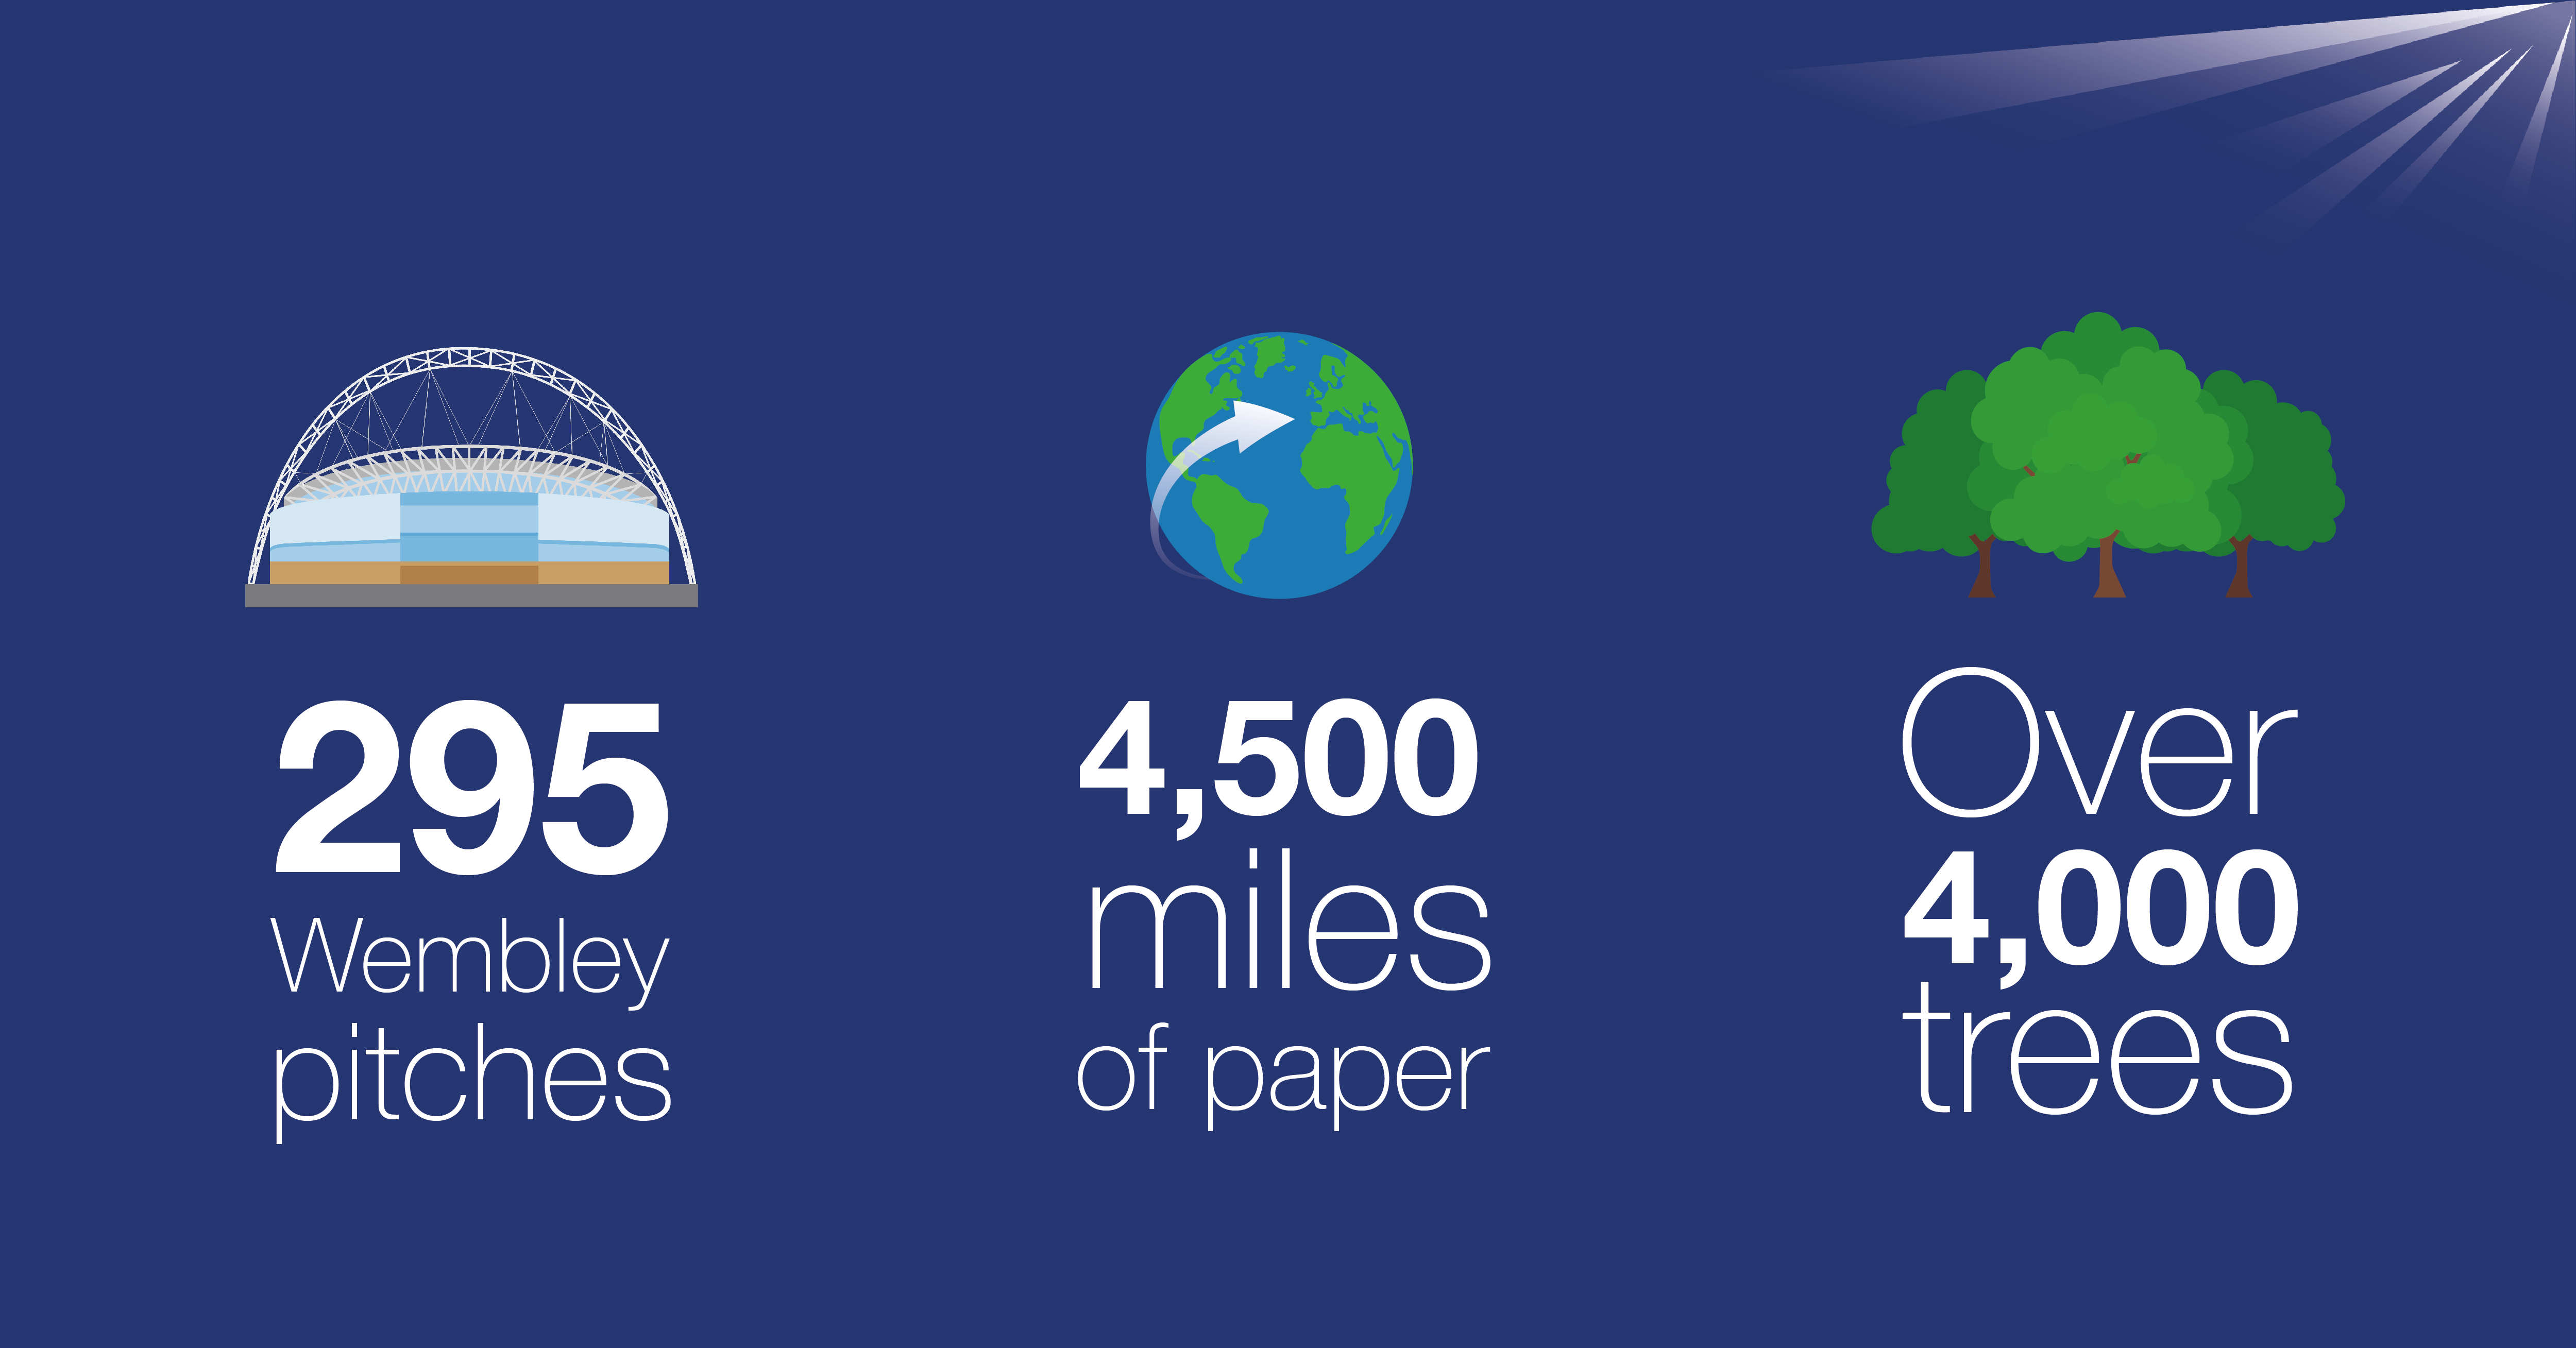 Image showing how much paper the MOT uses. E.g 295 wembley pitches, 4,500 miles of paper and over 4000 